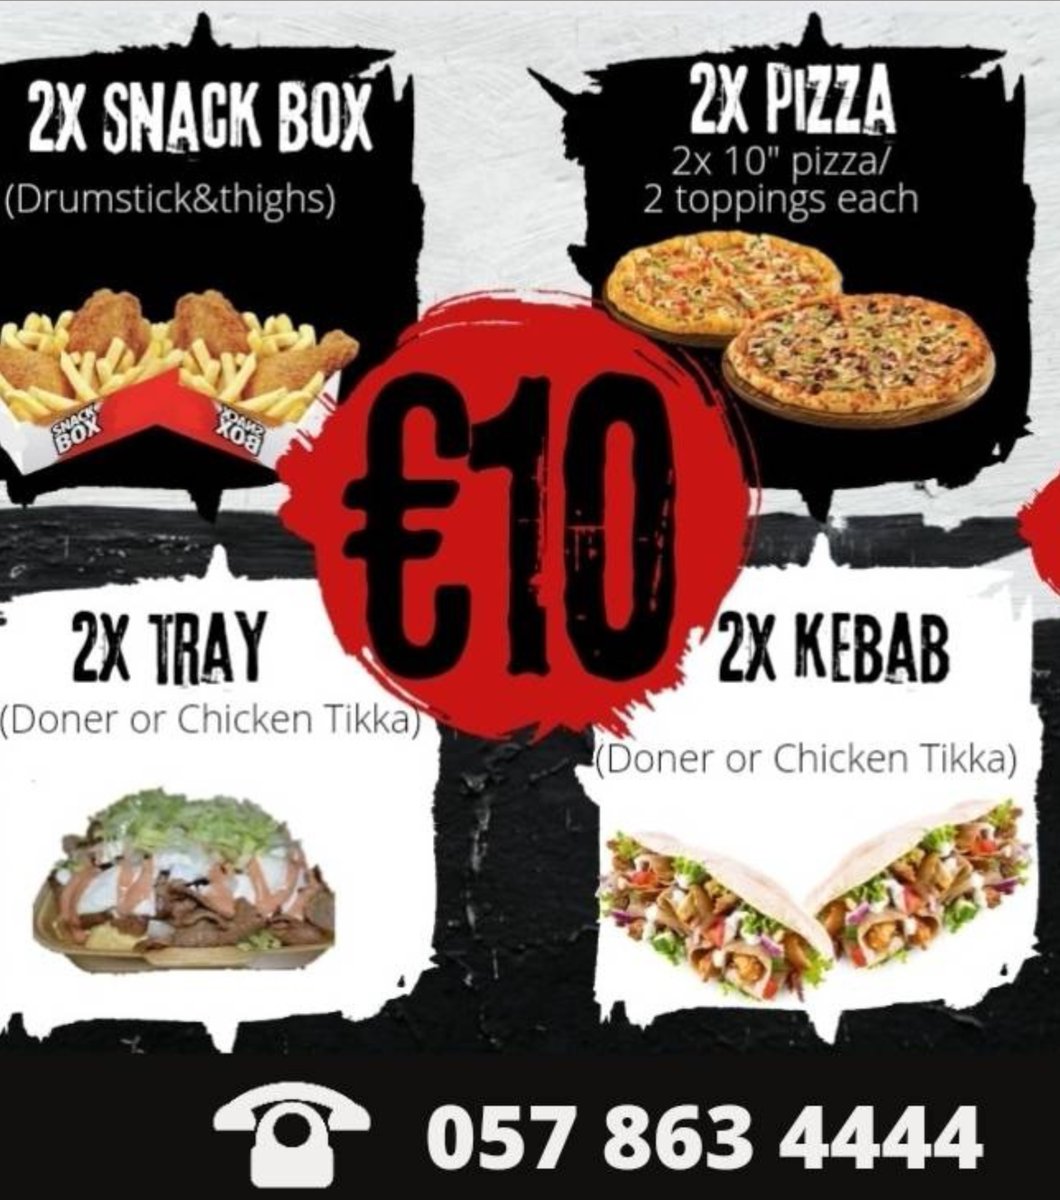 Best Choice pizza&kebab 
This week is last chance to get our #mixandmatch deal ☎️057 863 4444
This is a #sponsored post, supporting business in our community 💕